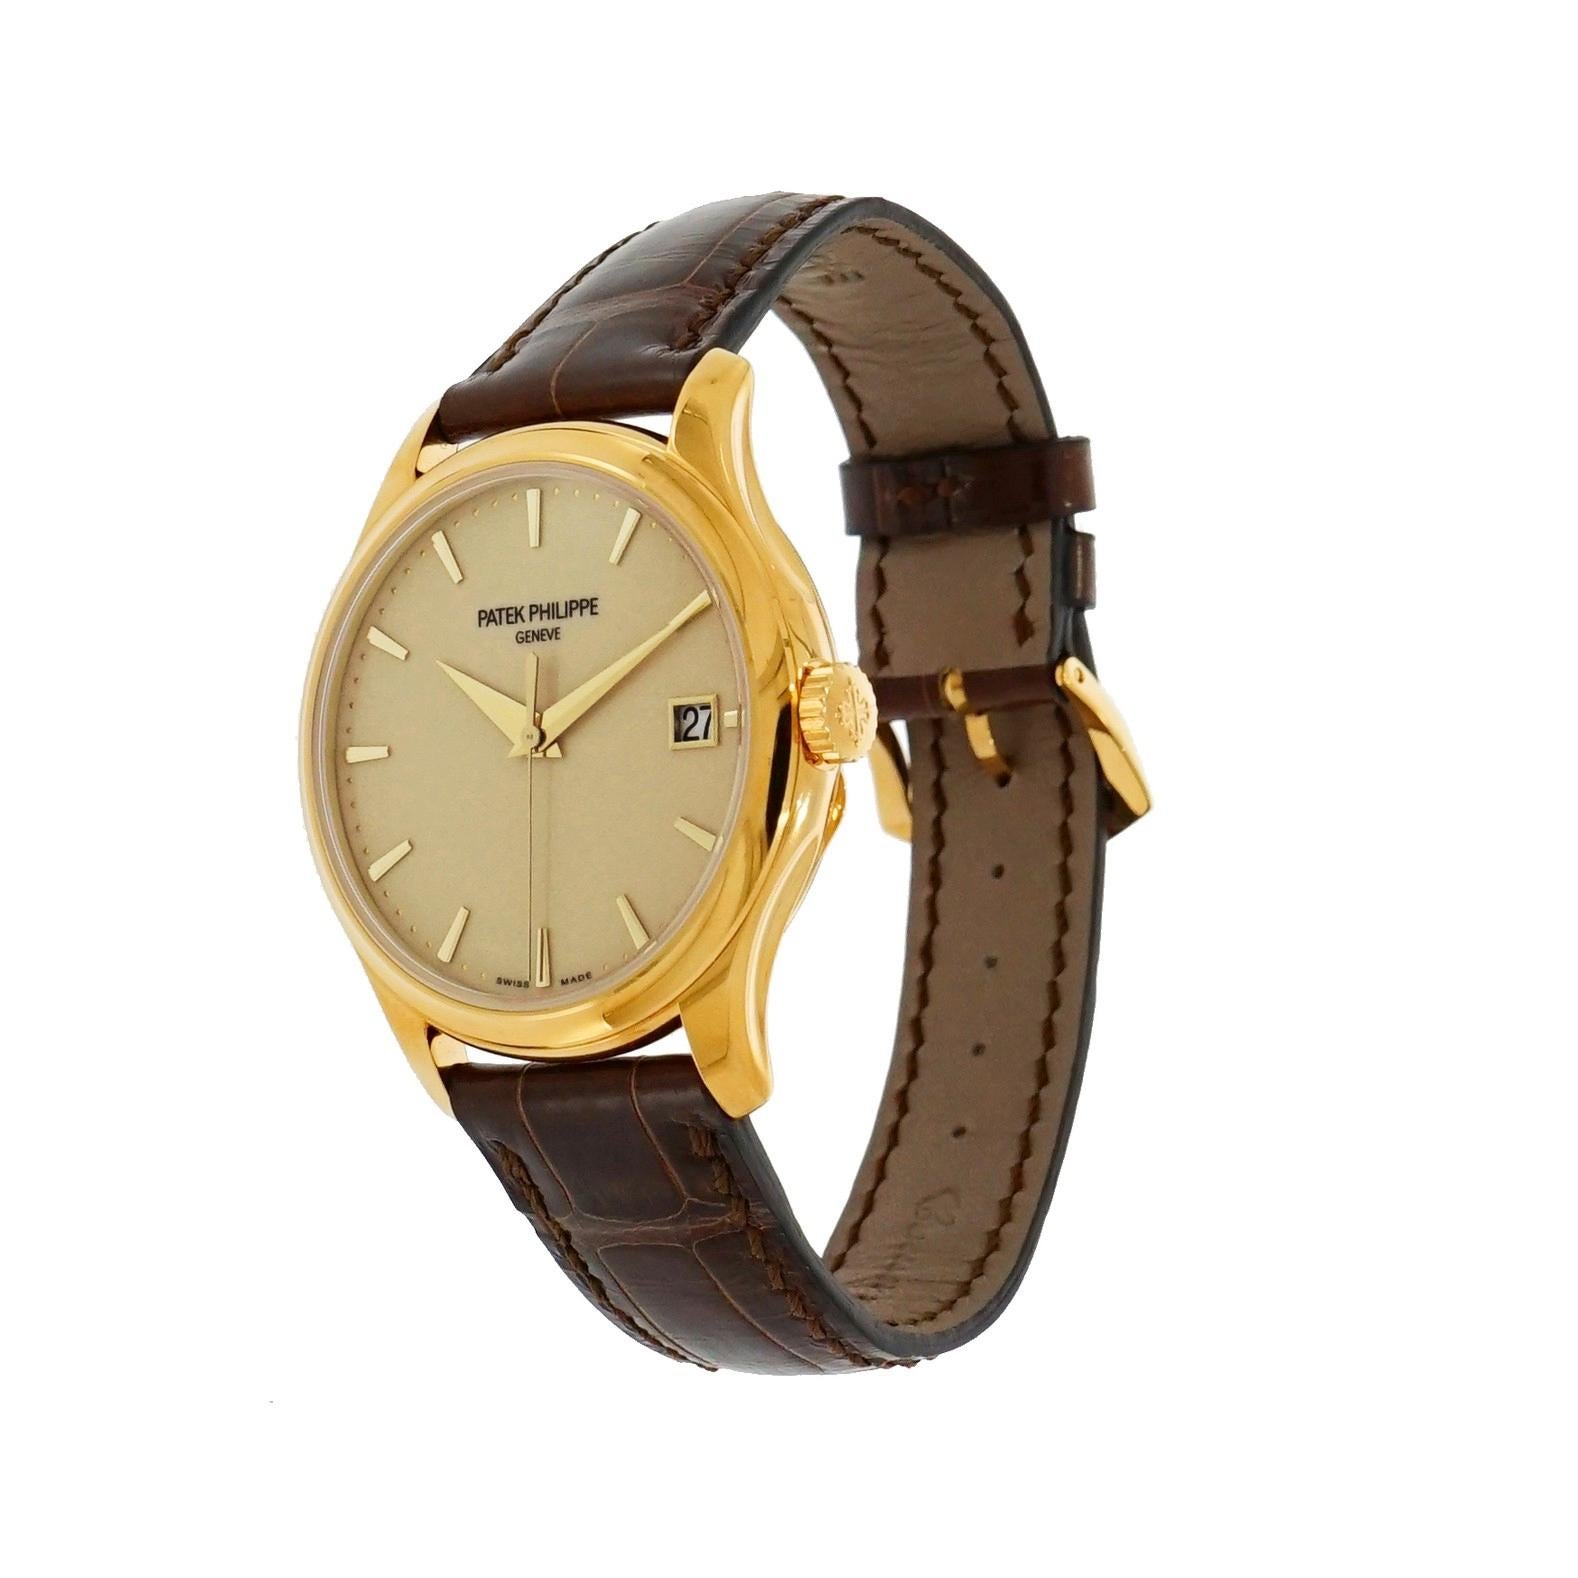 Pre-owned in excellent condition Patek Philippe Calatrava in 18m karat yellow gold 39 mm case, sleek lines and sophisticated elegance, ivory lacquered dial with gold applied trapeze shapped indexes hour markers, date aperture at 3 o’clock,  center